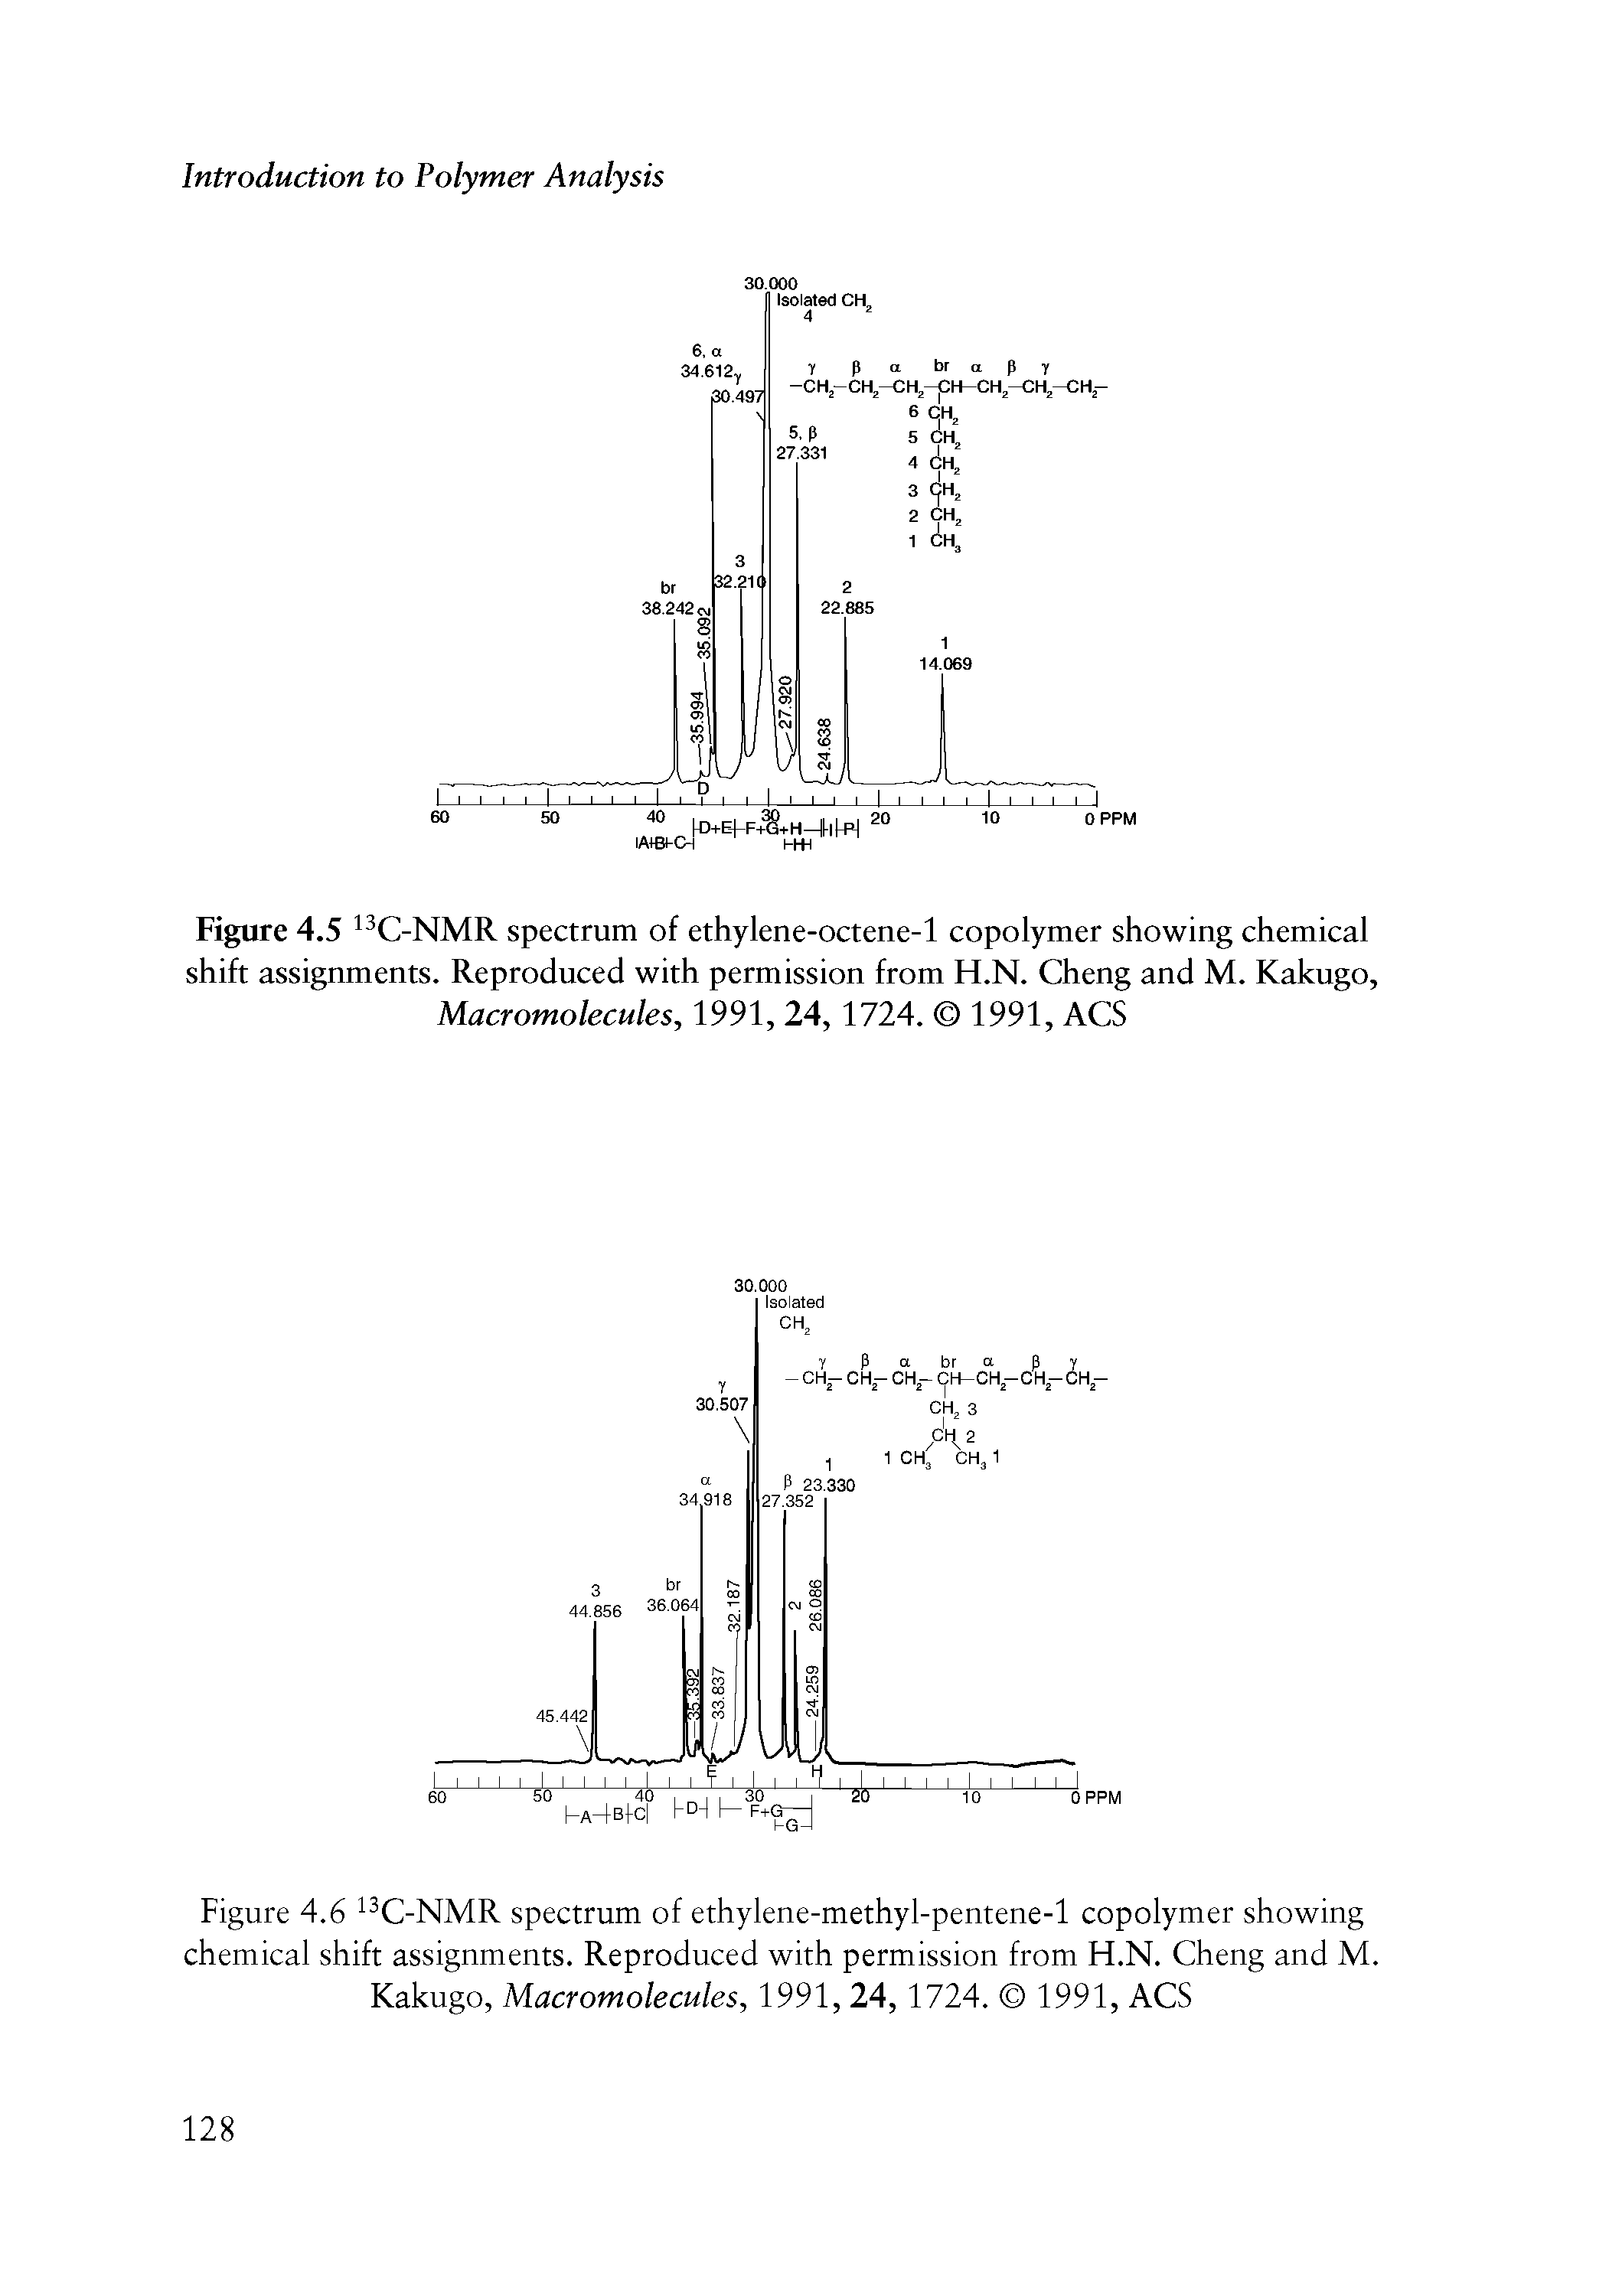 Figure 4.6 C-NMR spectrum of ethylene-methyl-pentene-1 copolymer showing chemical shift assignments. Reproduced with permission from H.N. Cheng and M. Kakugo, Macromolecules, 1991,24,1724. 1991, ACS...